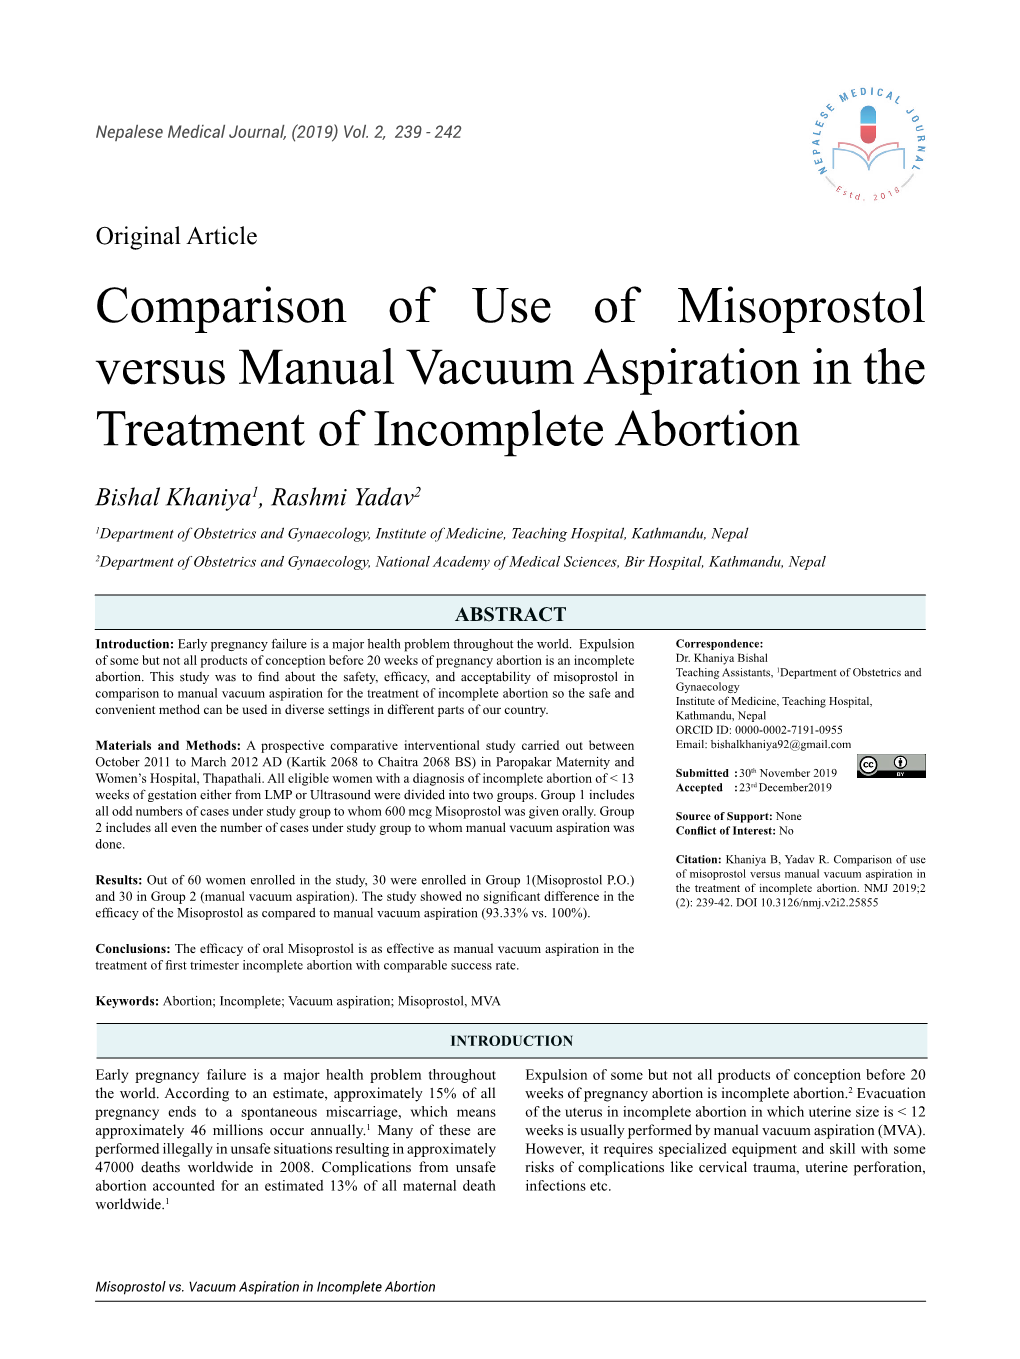 Comparison of Use of Misoprostol Versus Manual Vacuum Aspiration in the Treatment of Incomplete Abortion